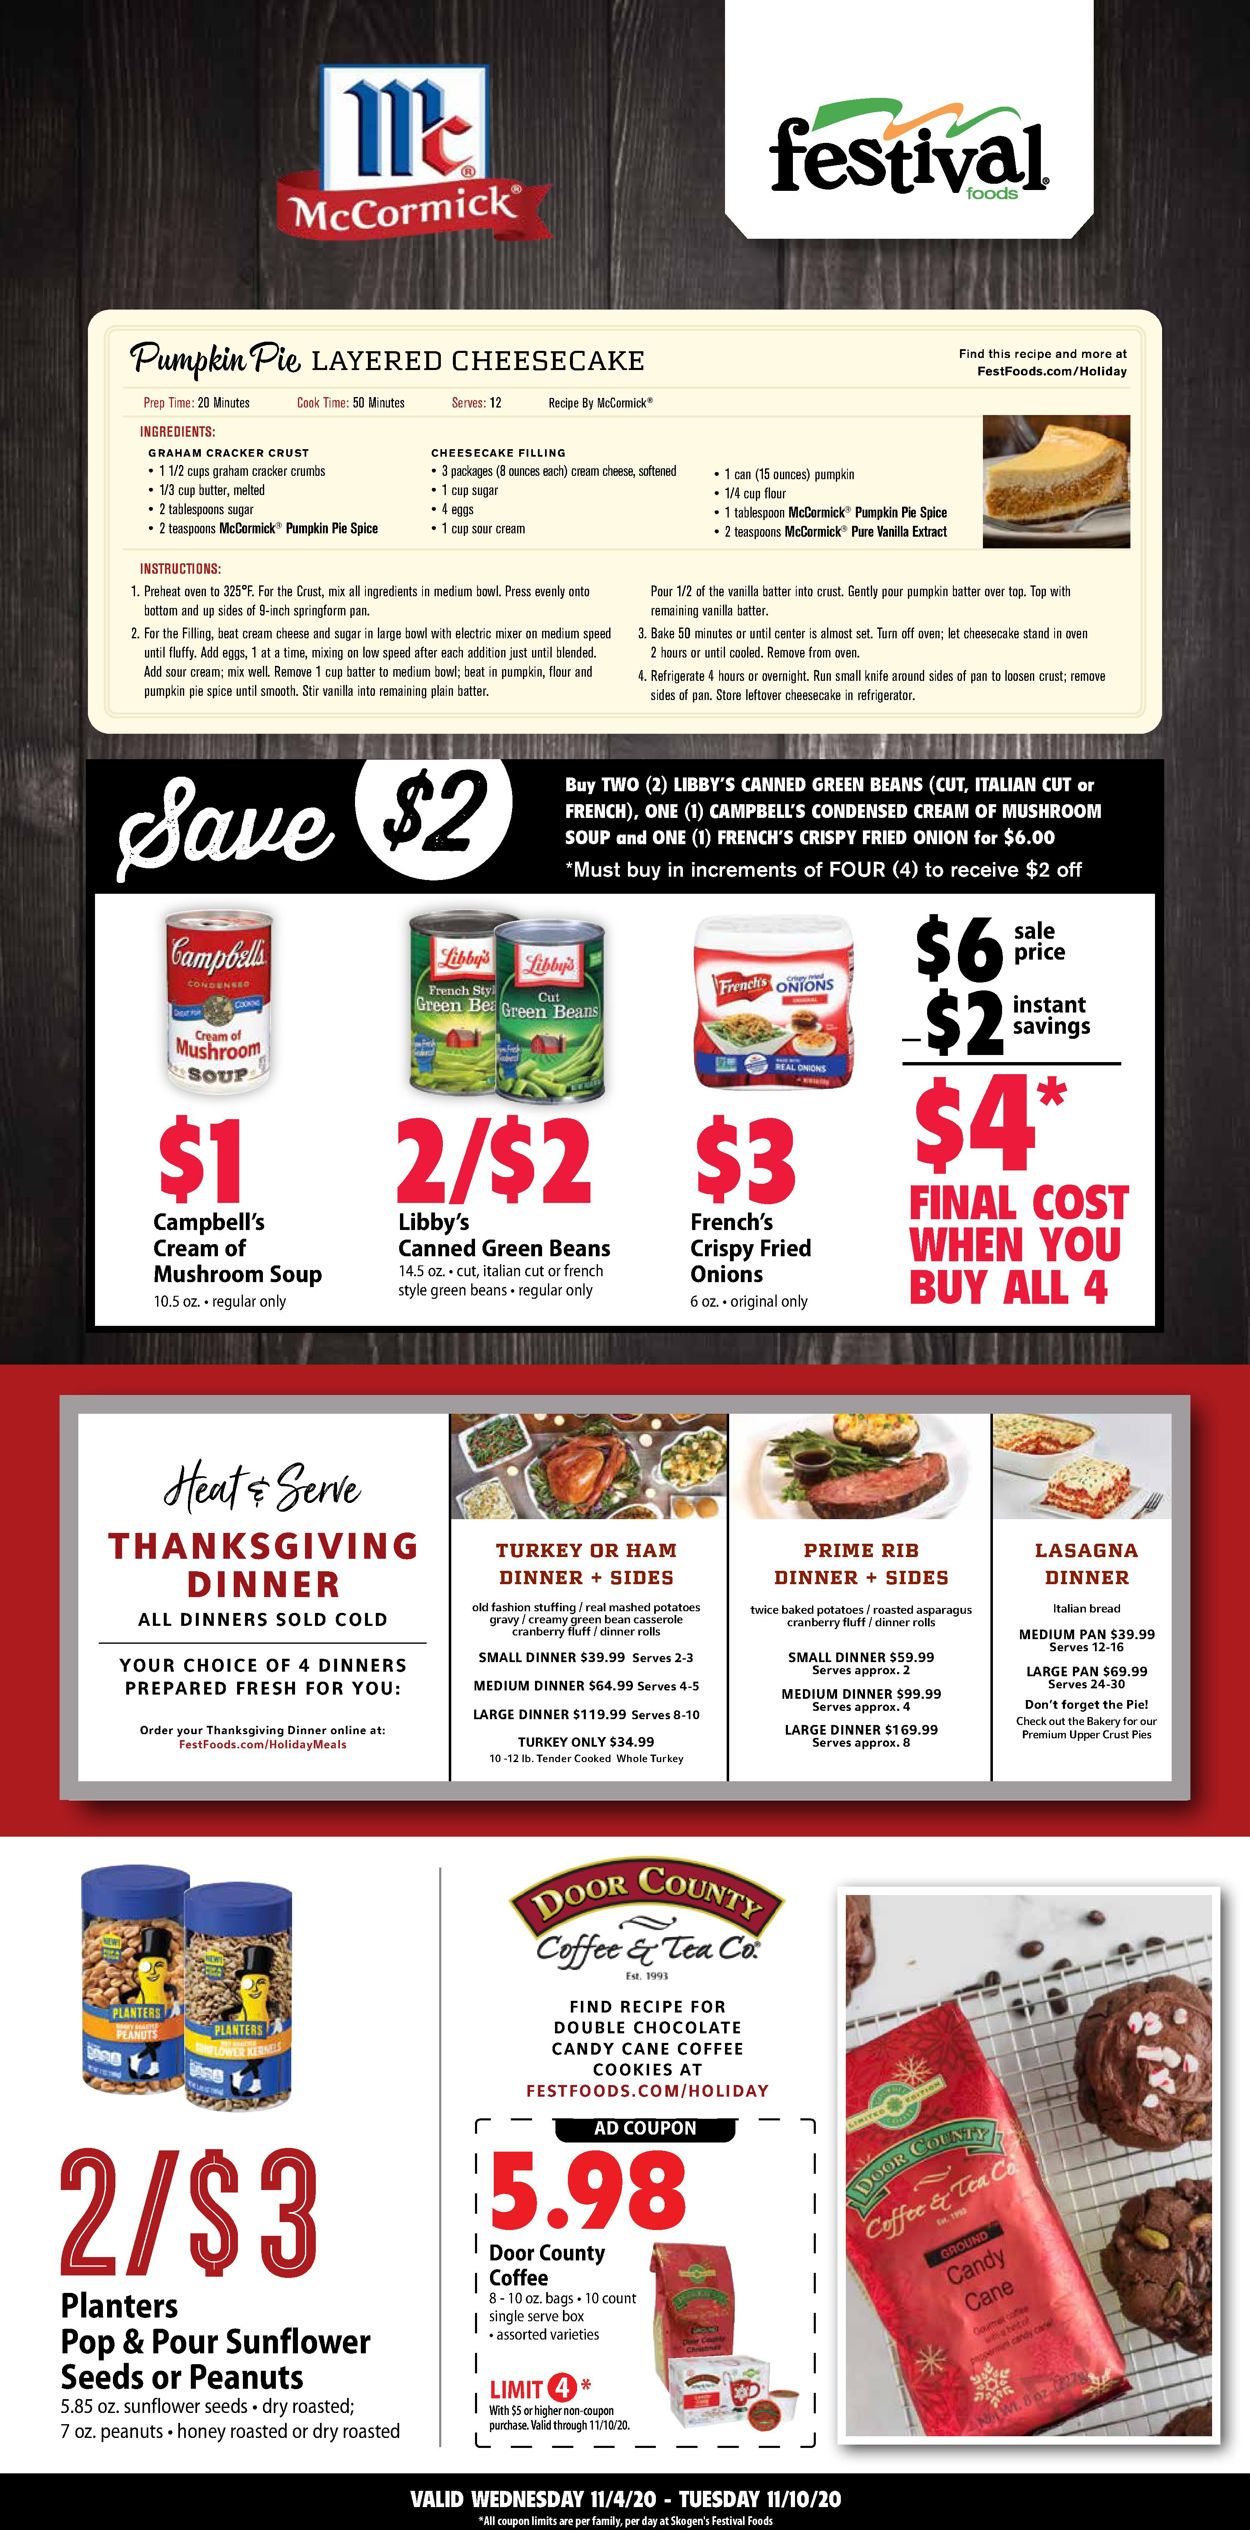 Festival Foods Current weekly ad 10/28 - 11/10/2020 [3] - frequent-ads.com